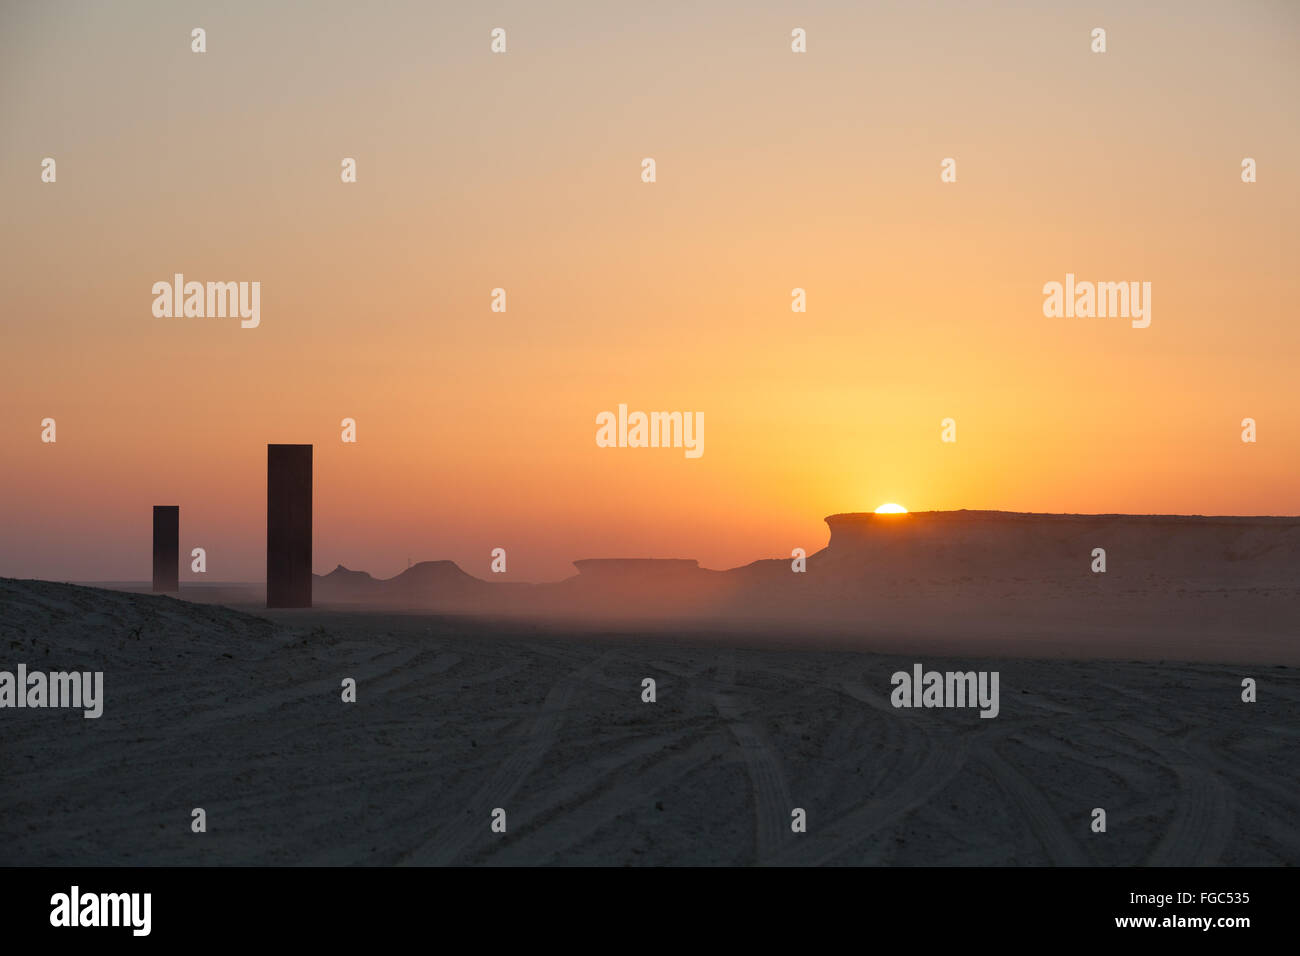 Sunset over East West West East in the Qatari desert. Public art installation by Richard Serra commissioned by Qatar Museums Authority. Stock Photo